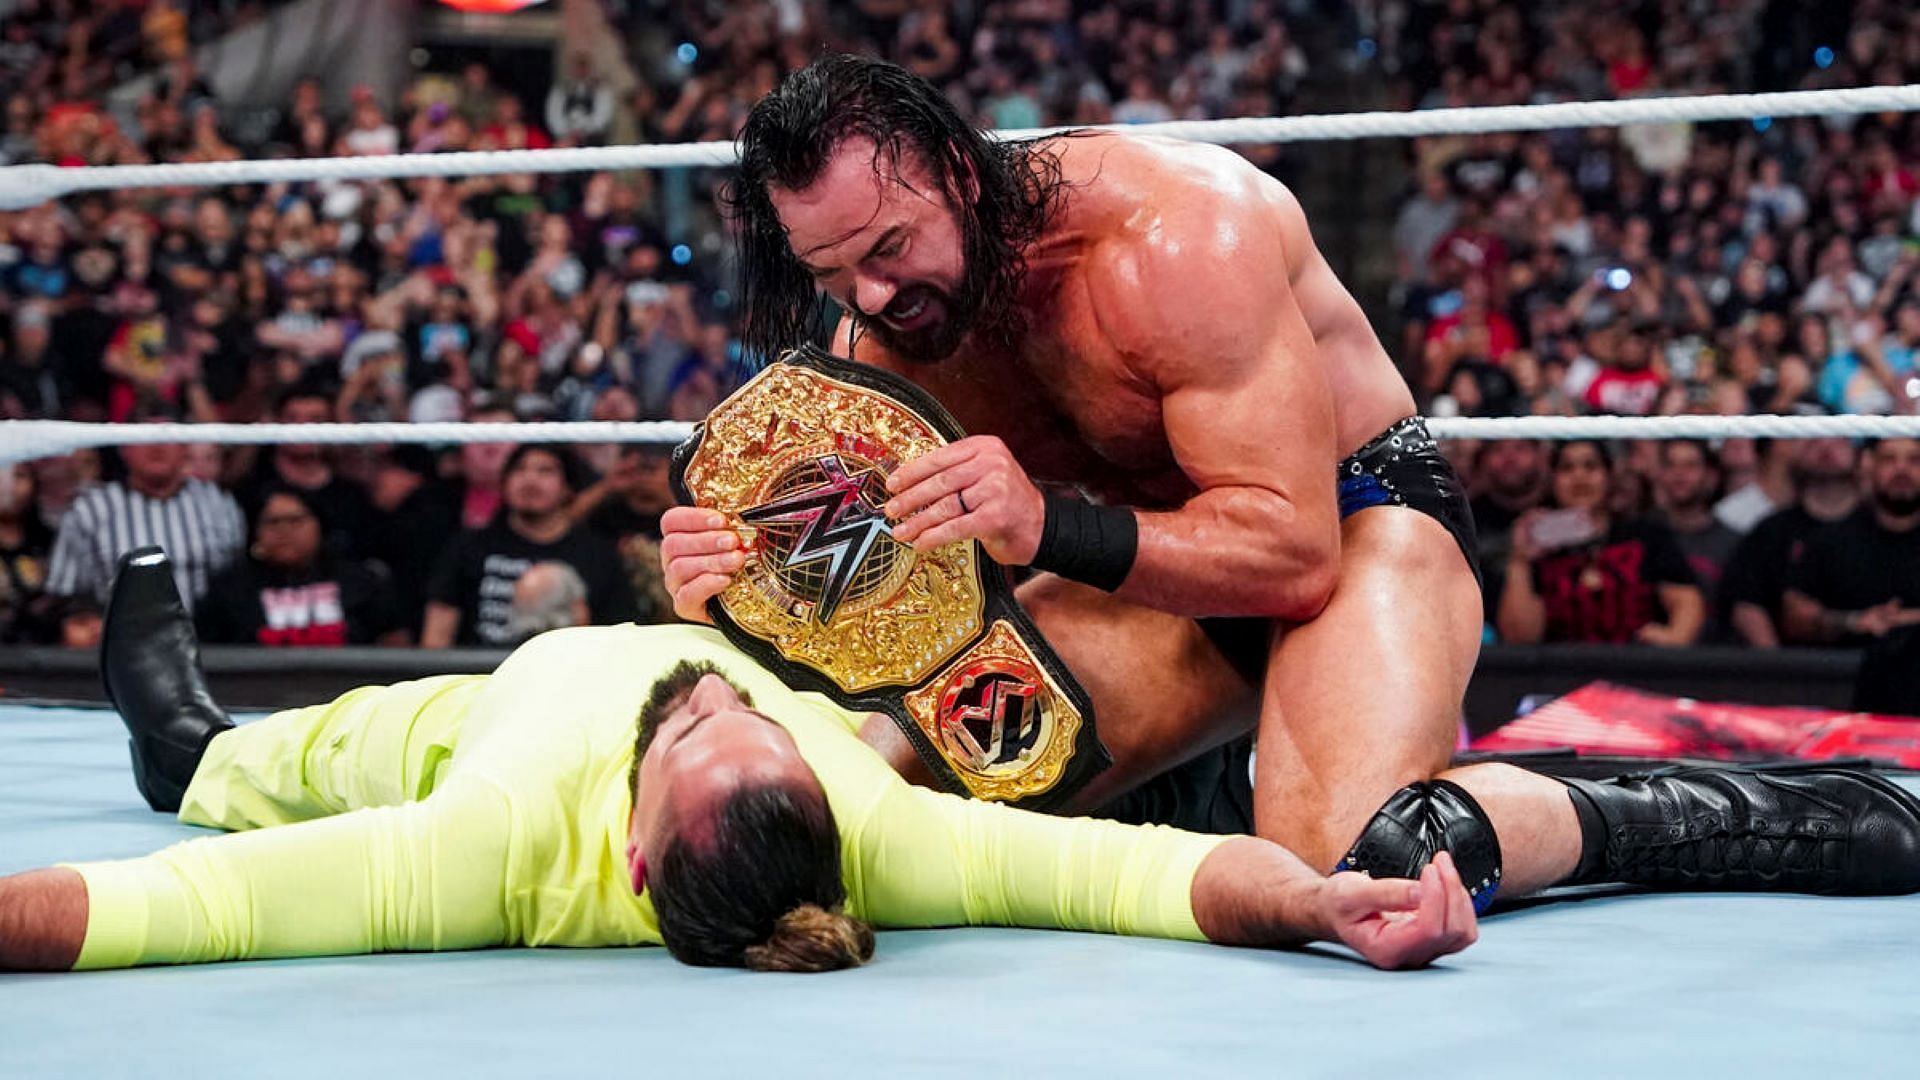 McIntyre would be the second person to hold the World Heavyweight Title.